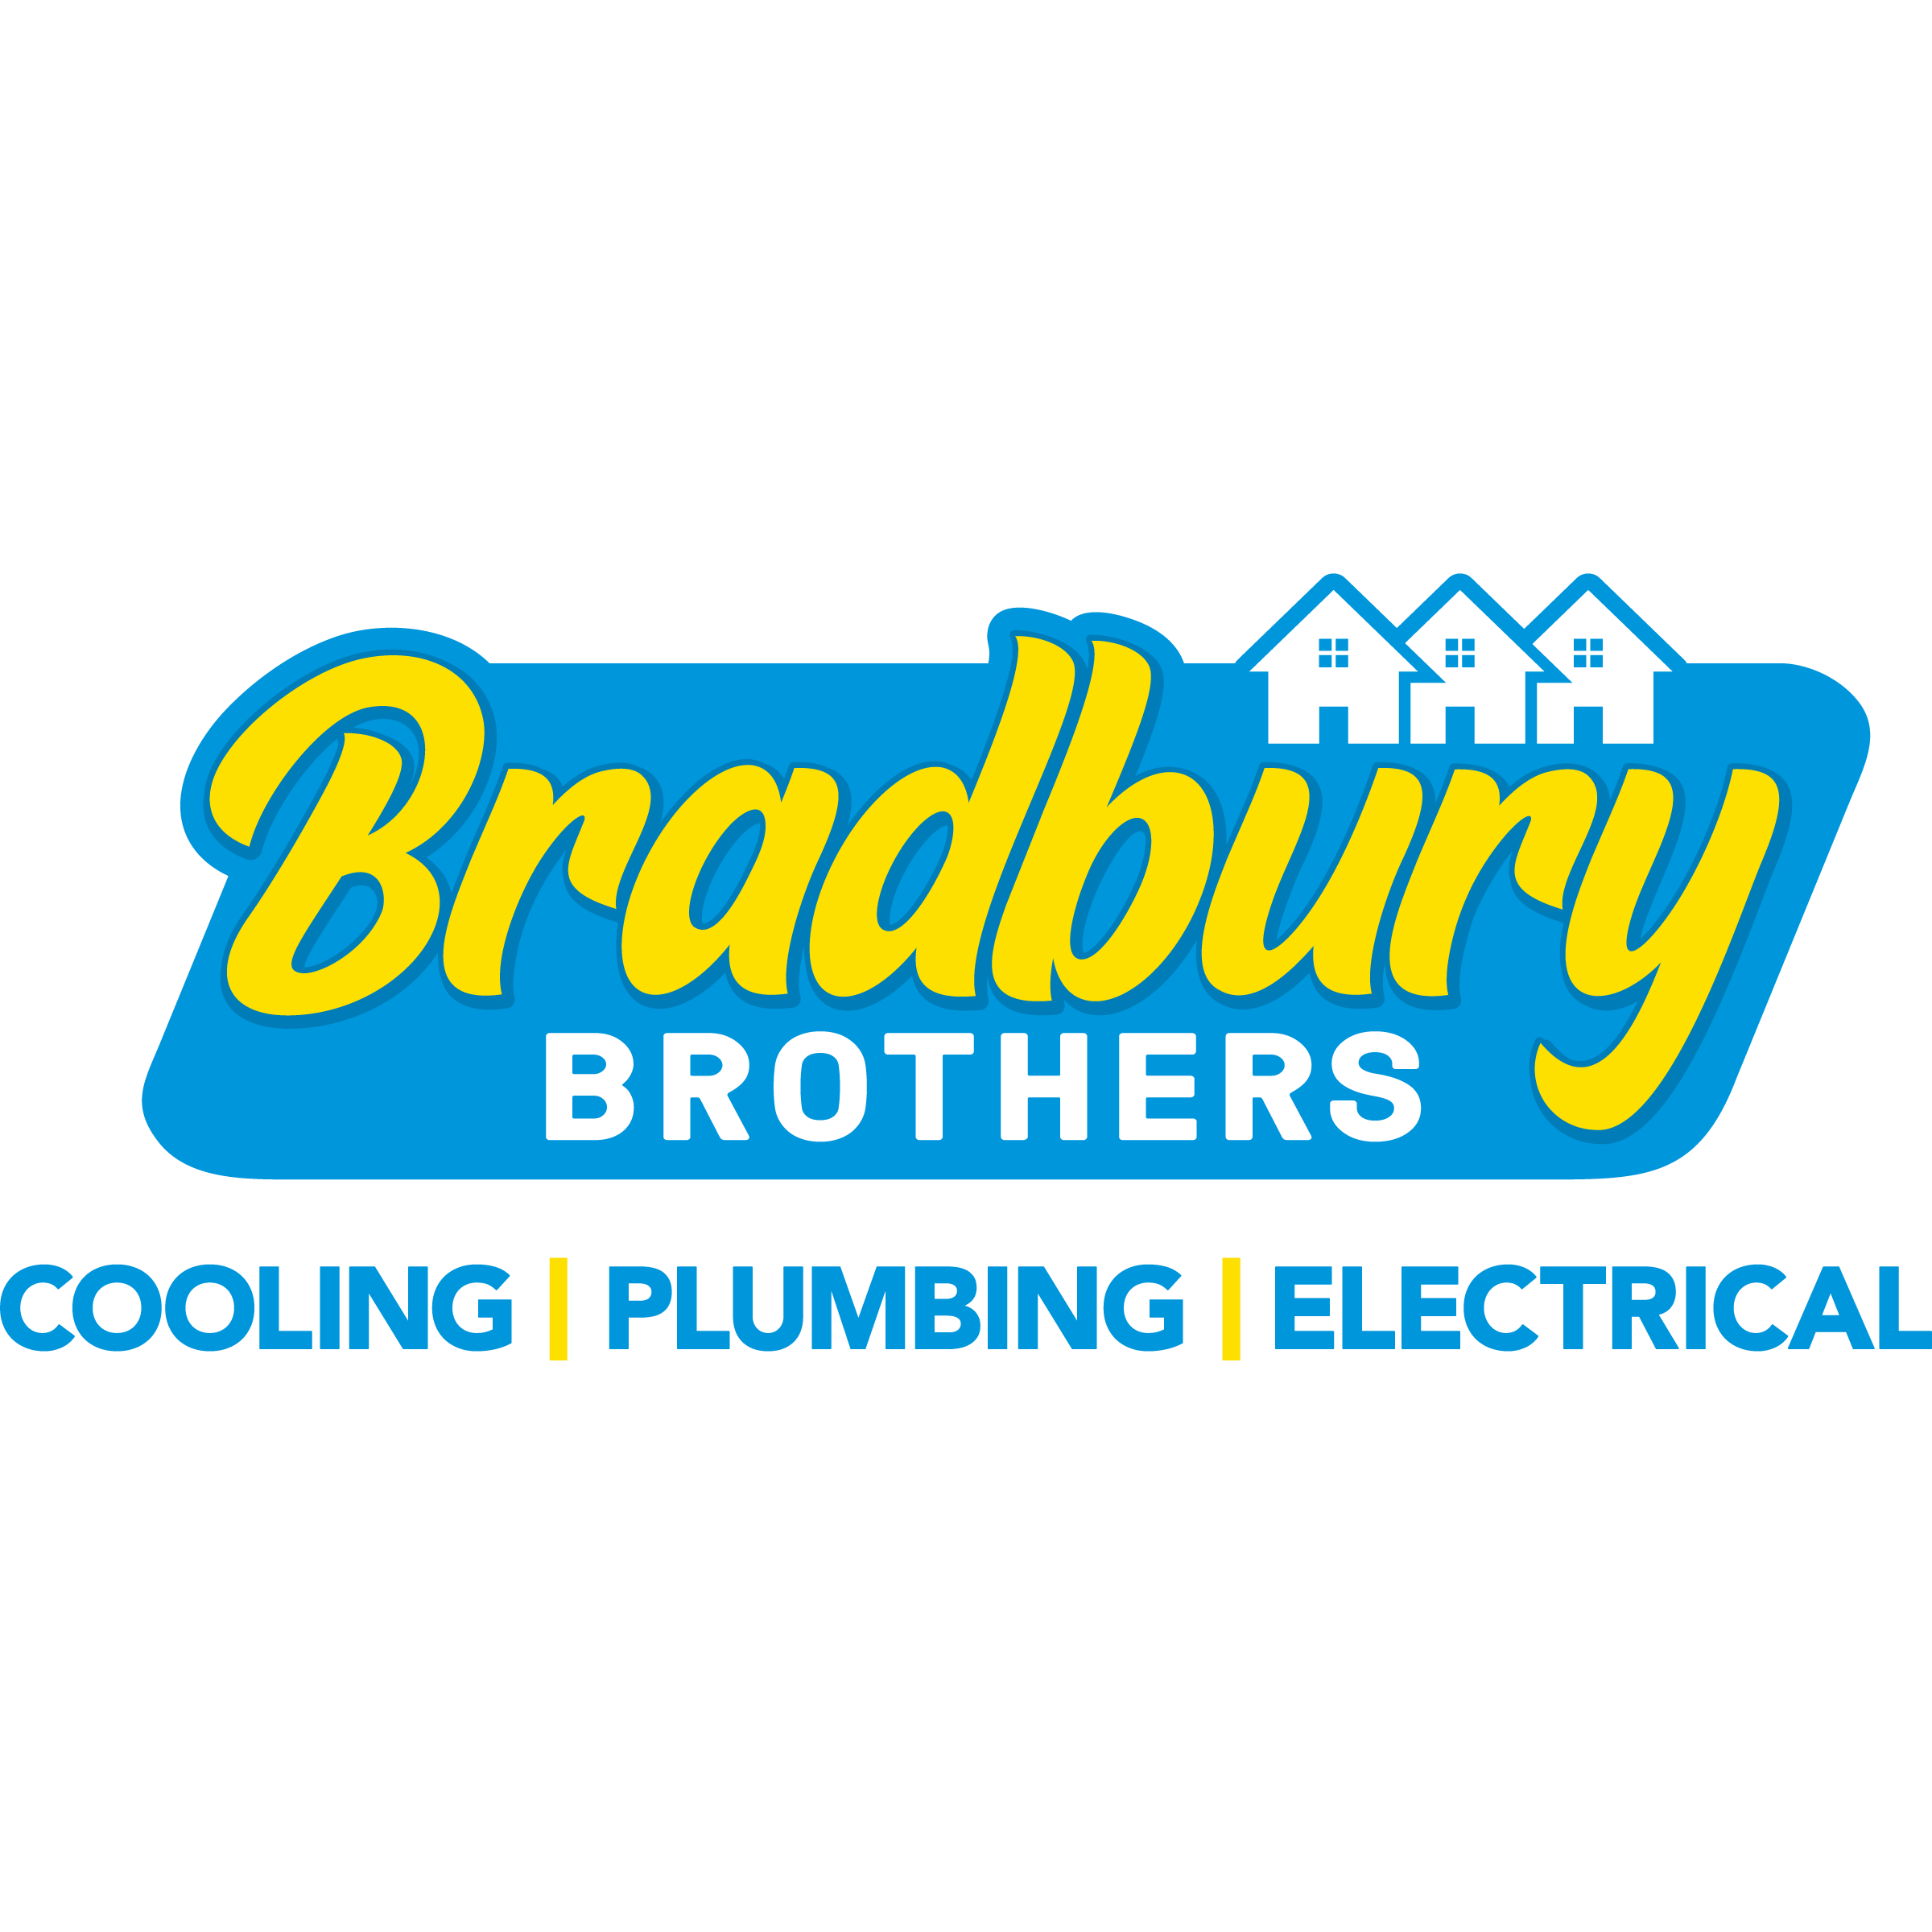 Bradbury Brothers Cooling, Plumbing & Electrical - Magnolia, TX 77354 - (281)651-5484 | ShowMeLocal.com